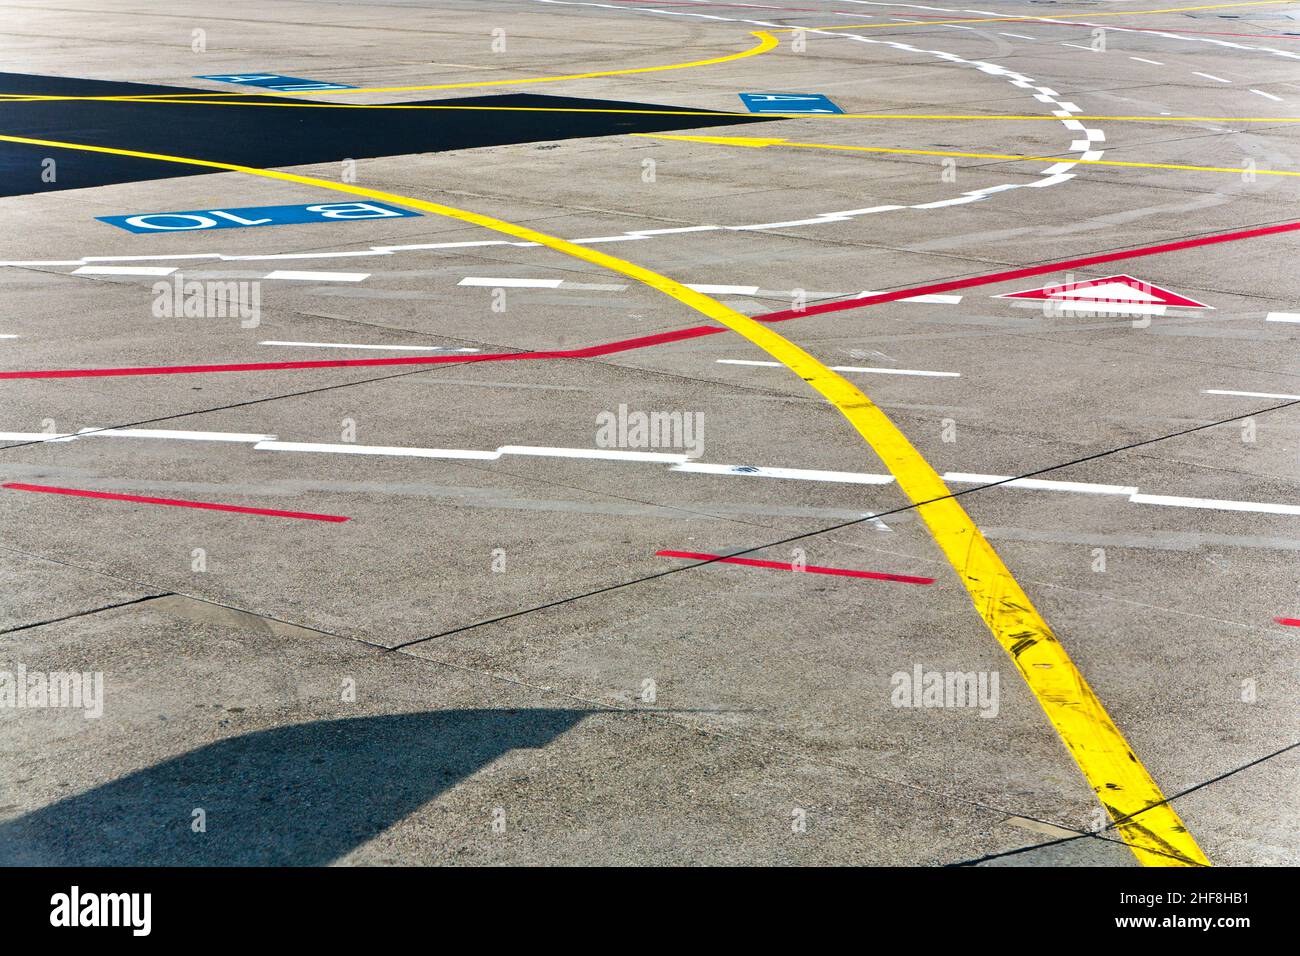 Marks on apron for aircraft orientation Stock Photo